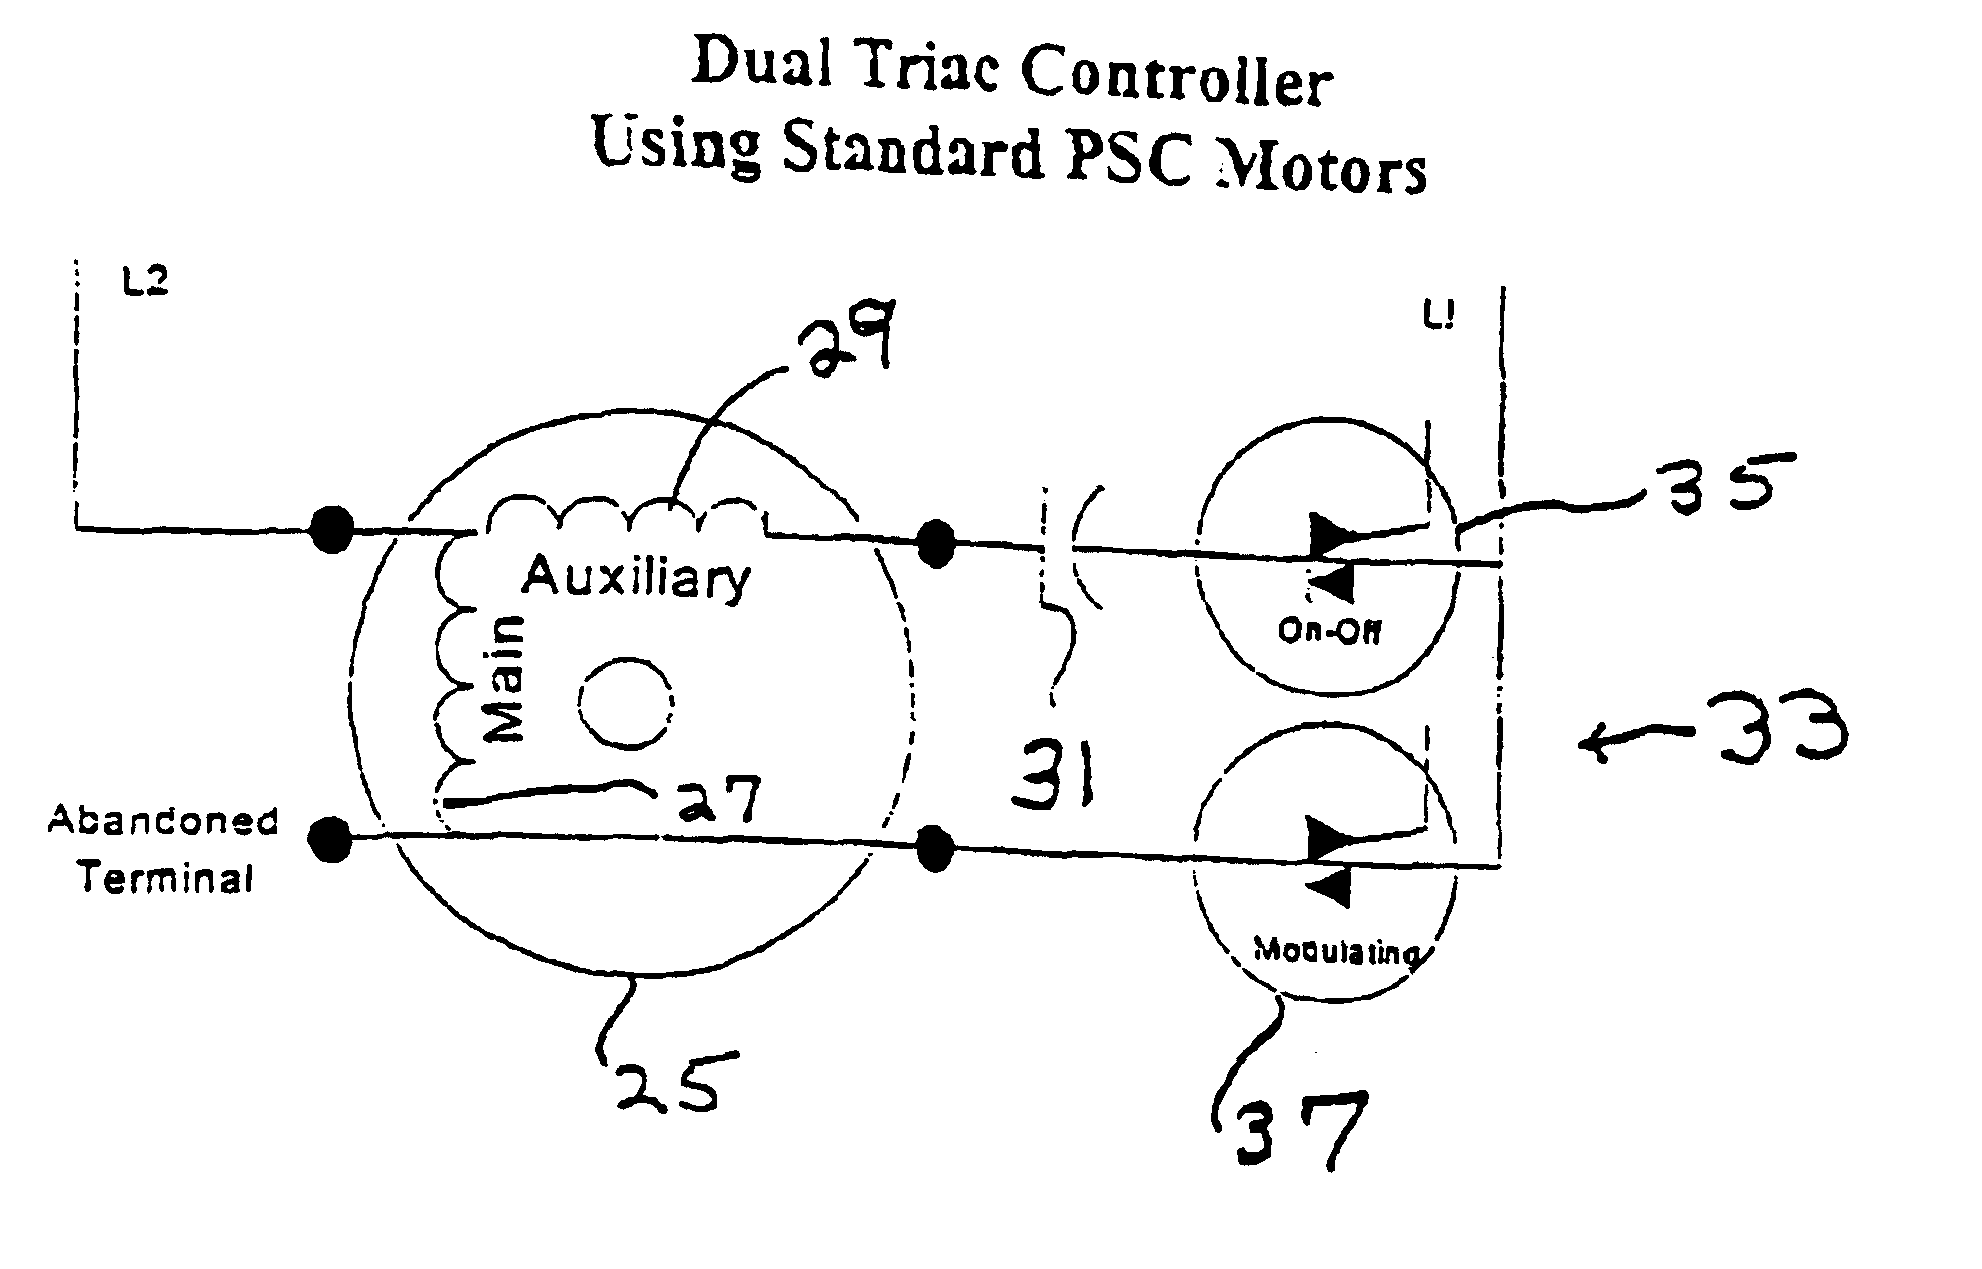 Variable speed controller for air moving applications using an AC induction motor